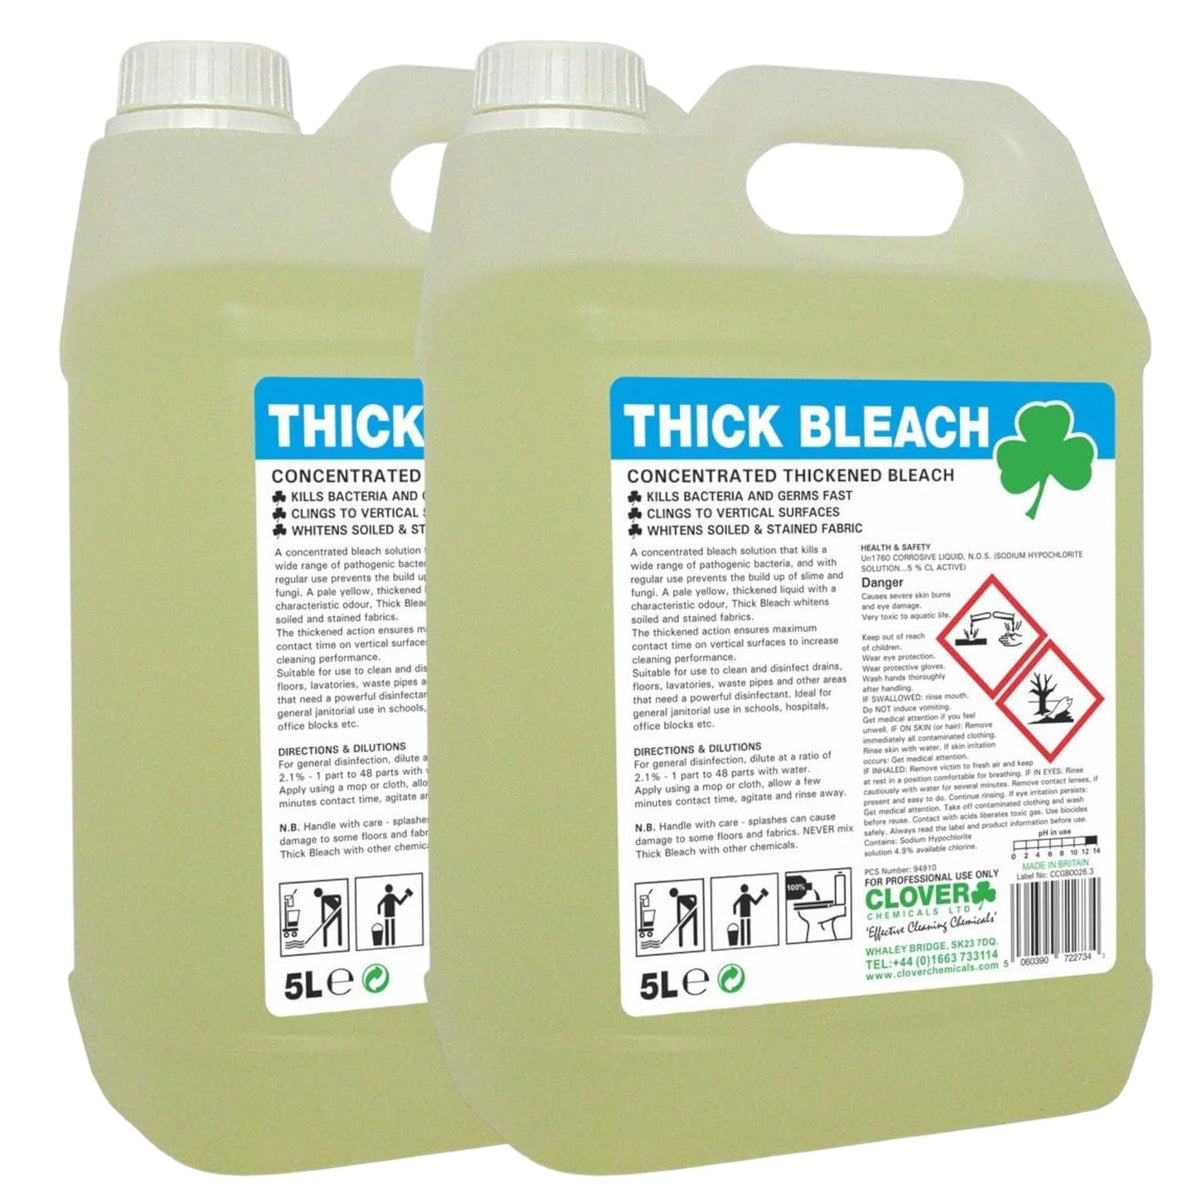 Clover Thick Bleach 5 Litre - Pack of 2